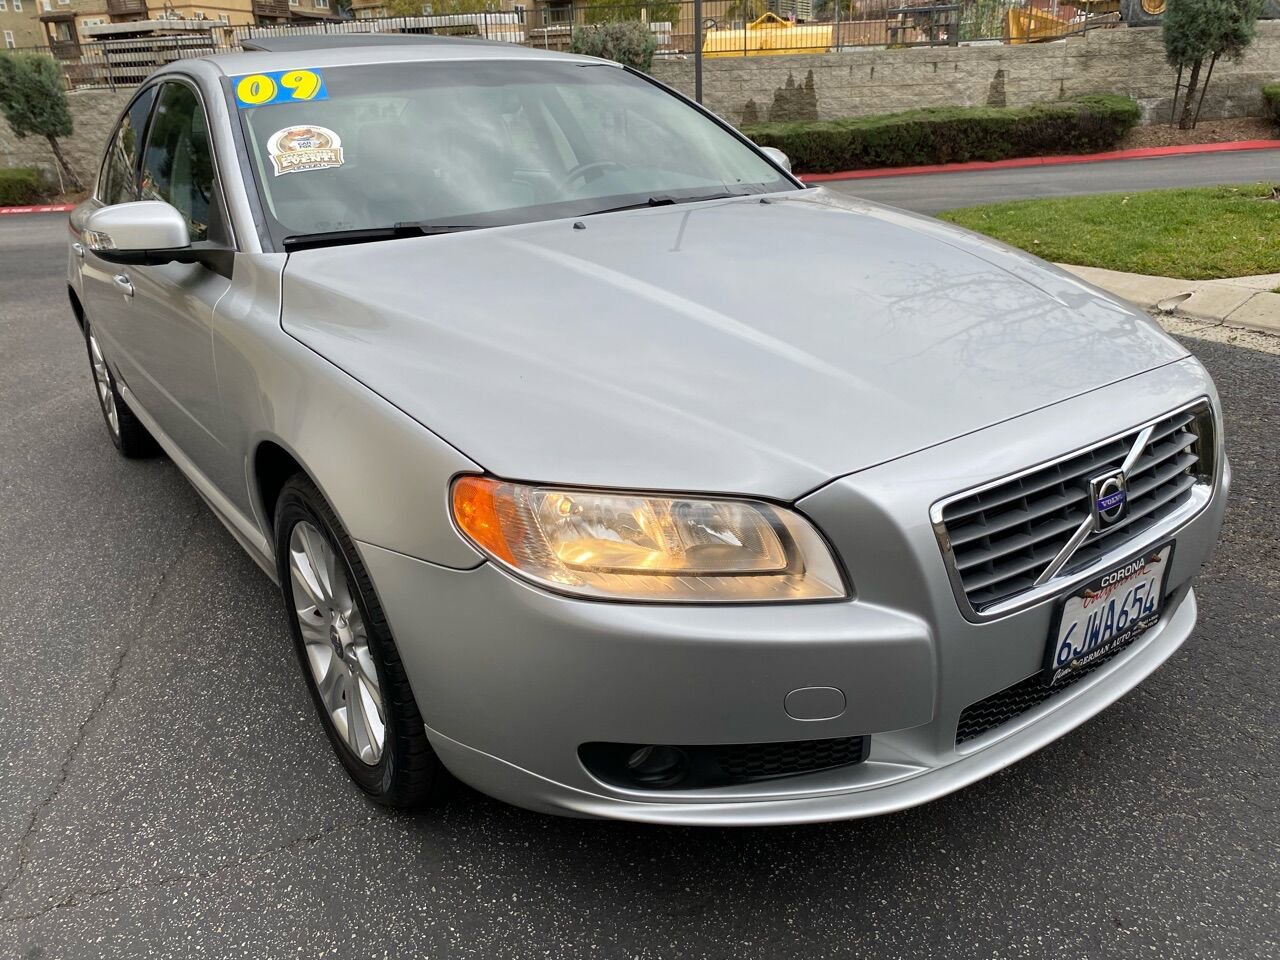 Used 2009 Volvo S80 for Sale Right Now - Autotrader